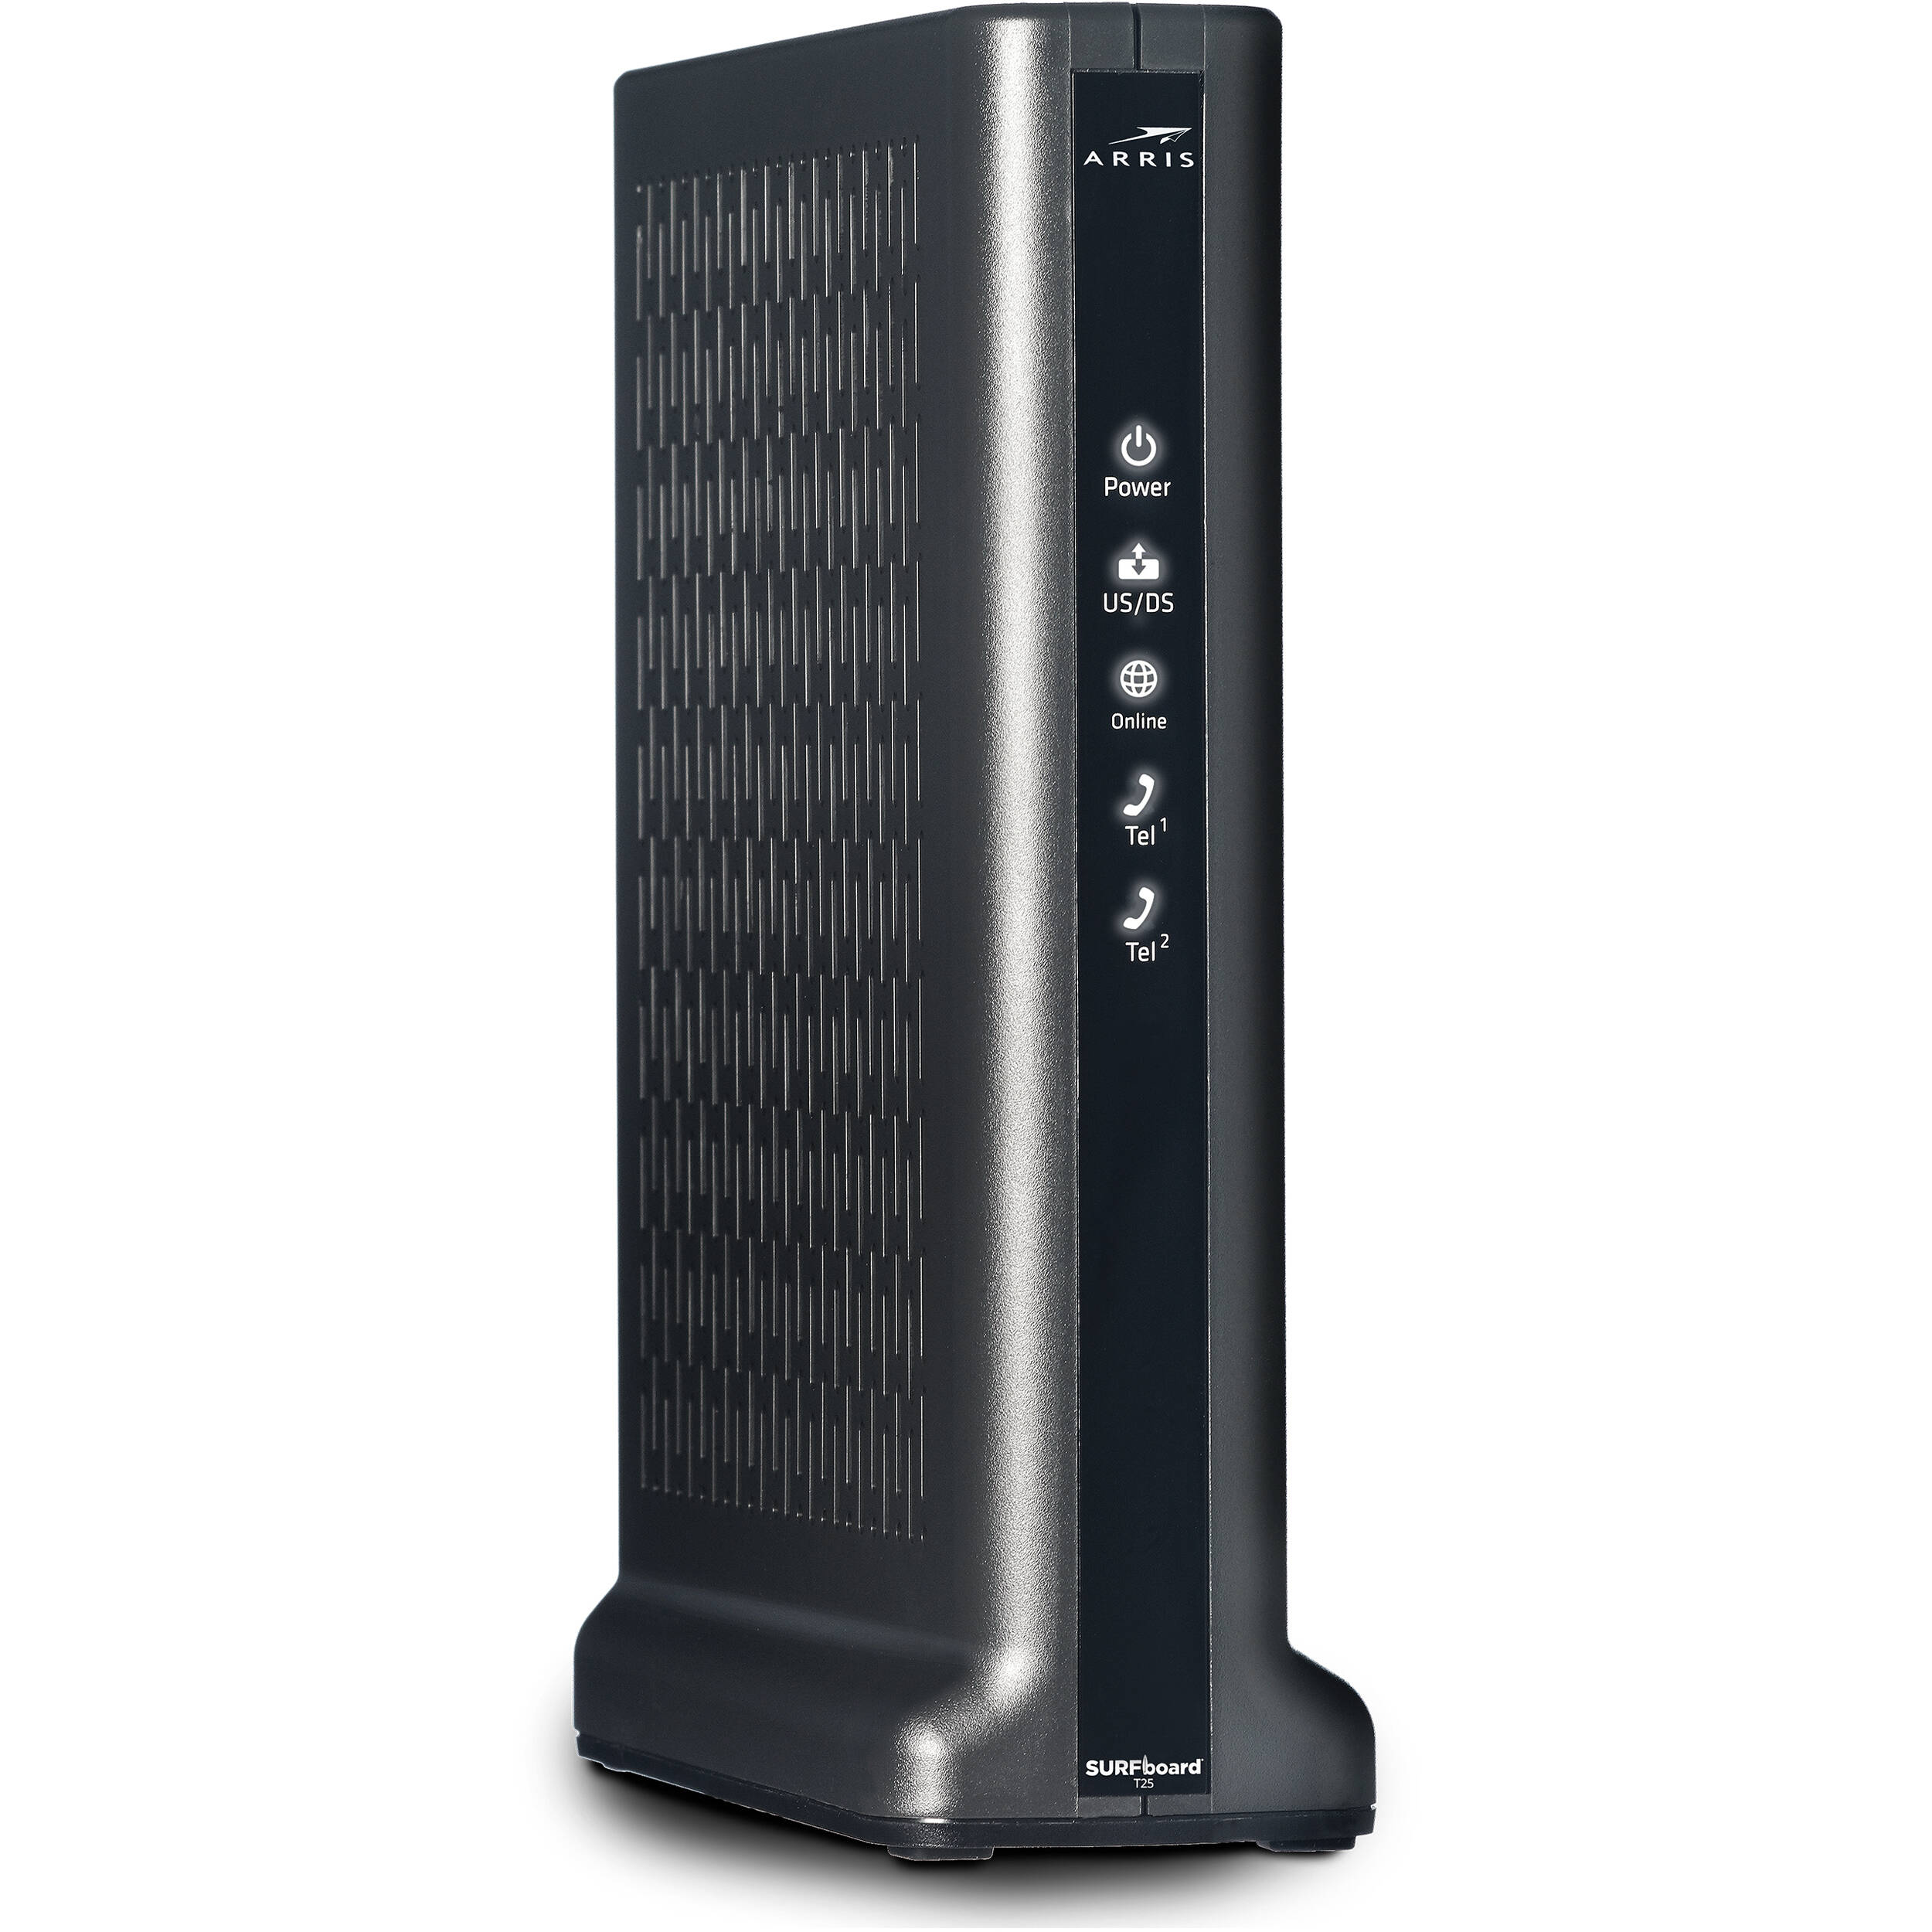 Arris T25-RB Surfboard DOCSIS 3.1 Gigabit Cable Modem, Certified for Xfinity Internet & Voice - Certified Refurbished